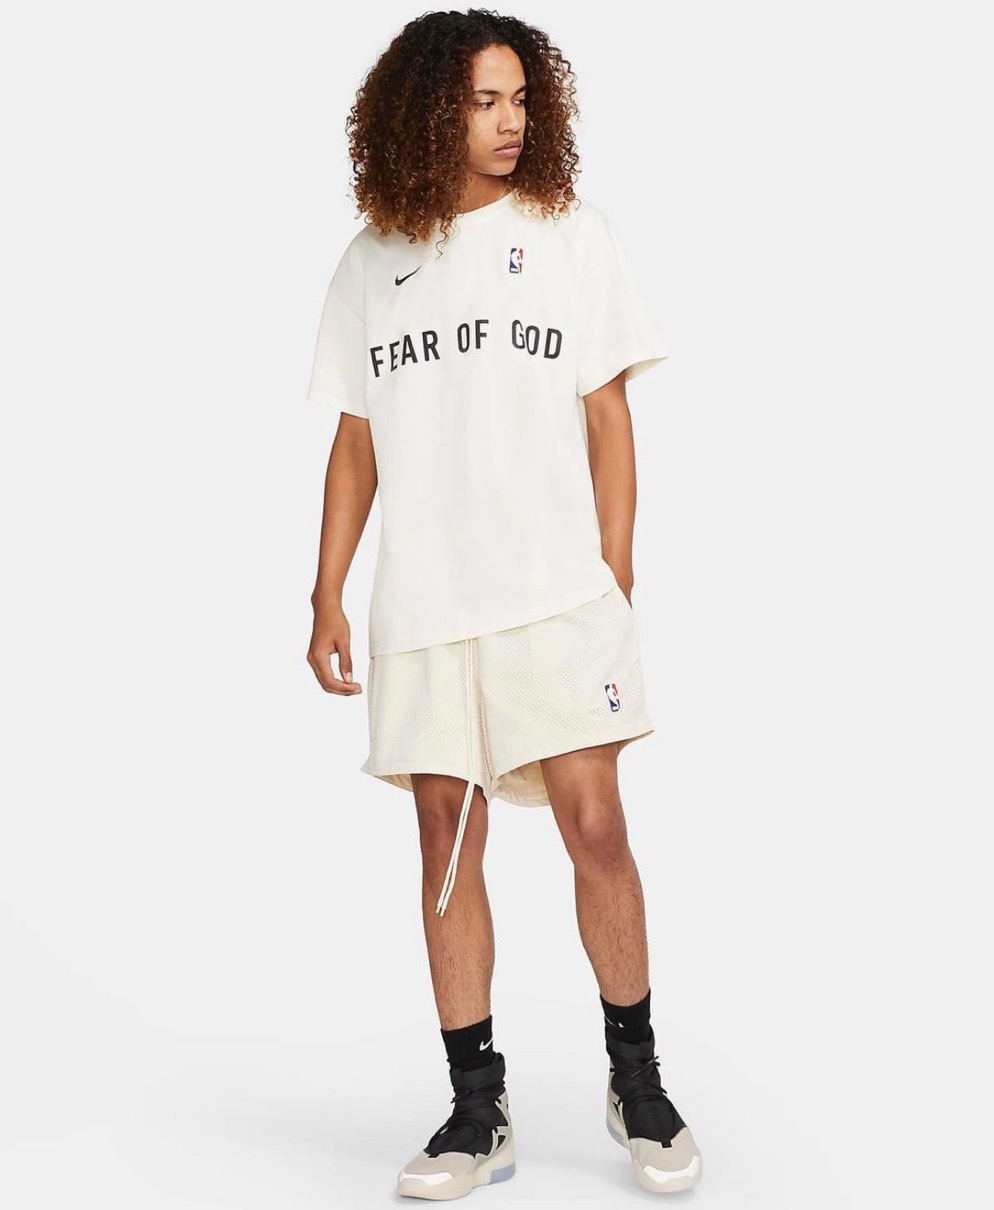 Nike × Fear of God】2020 Holiday Collectionが11月19日/12月25日に 